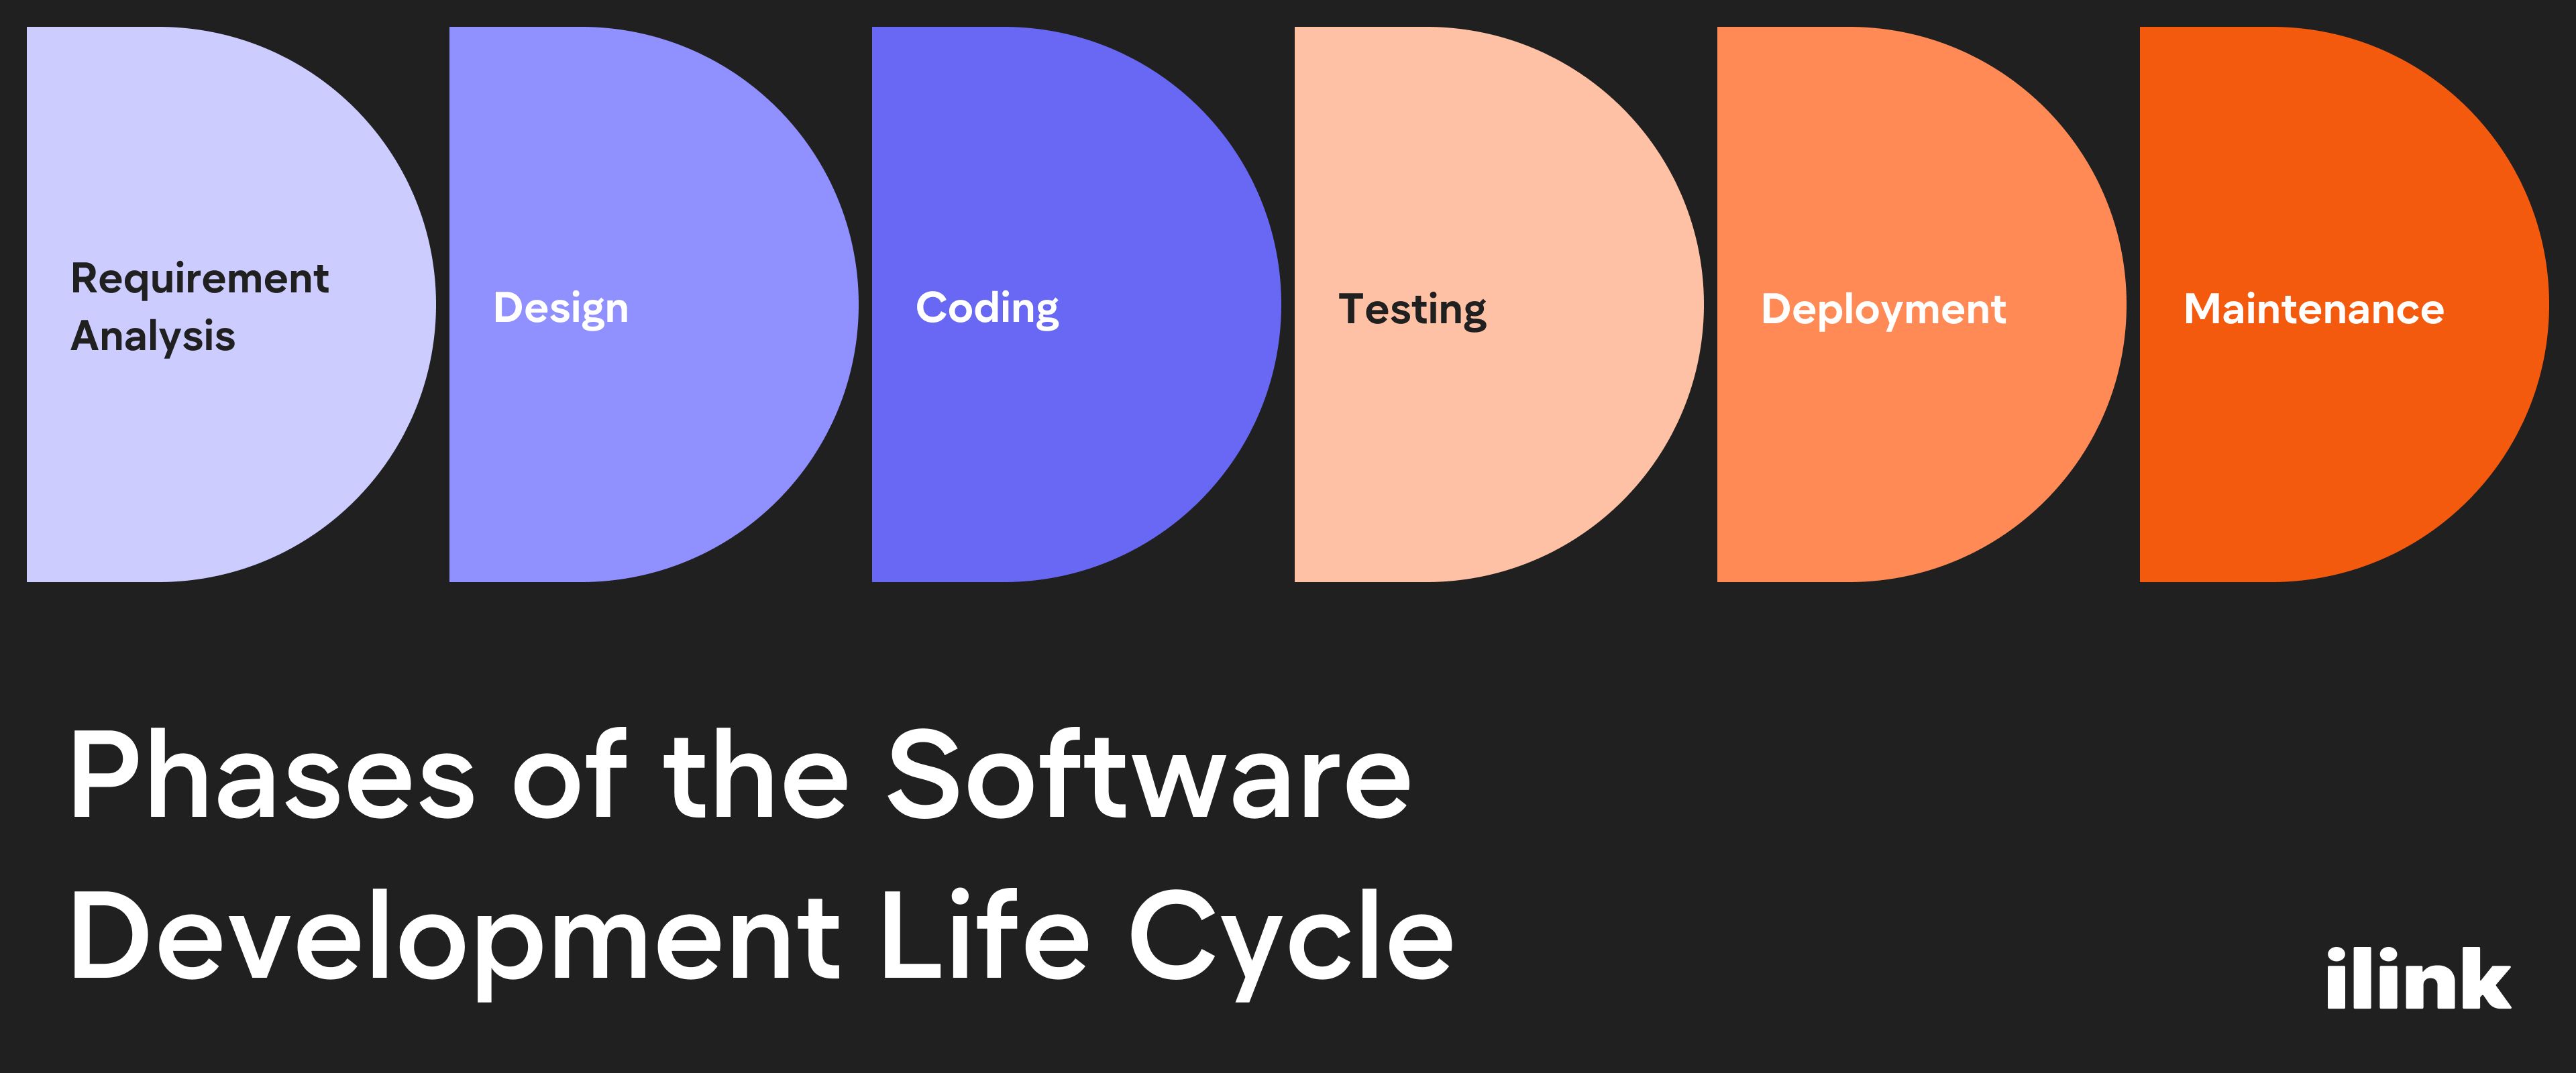 Phases of the Software Development Life Cycle | ilink blog